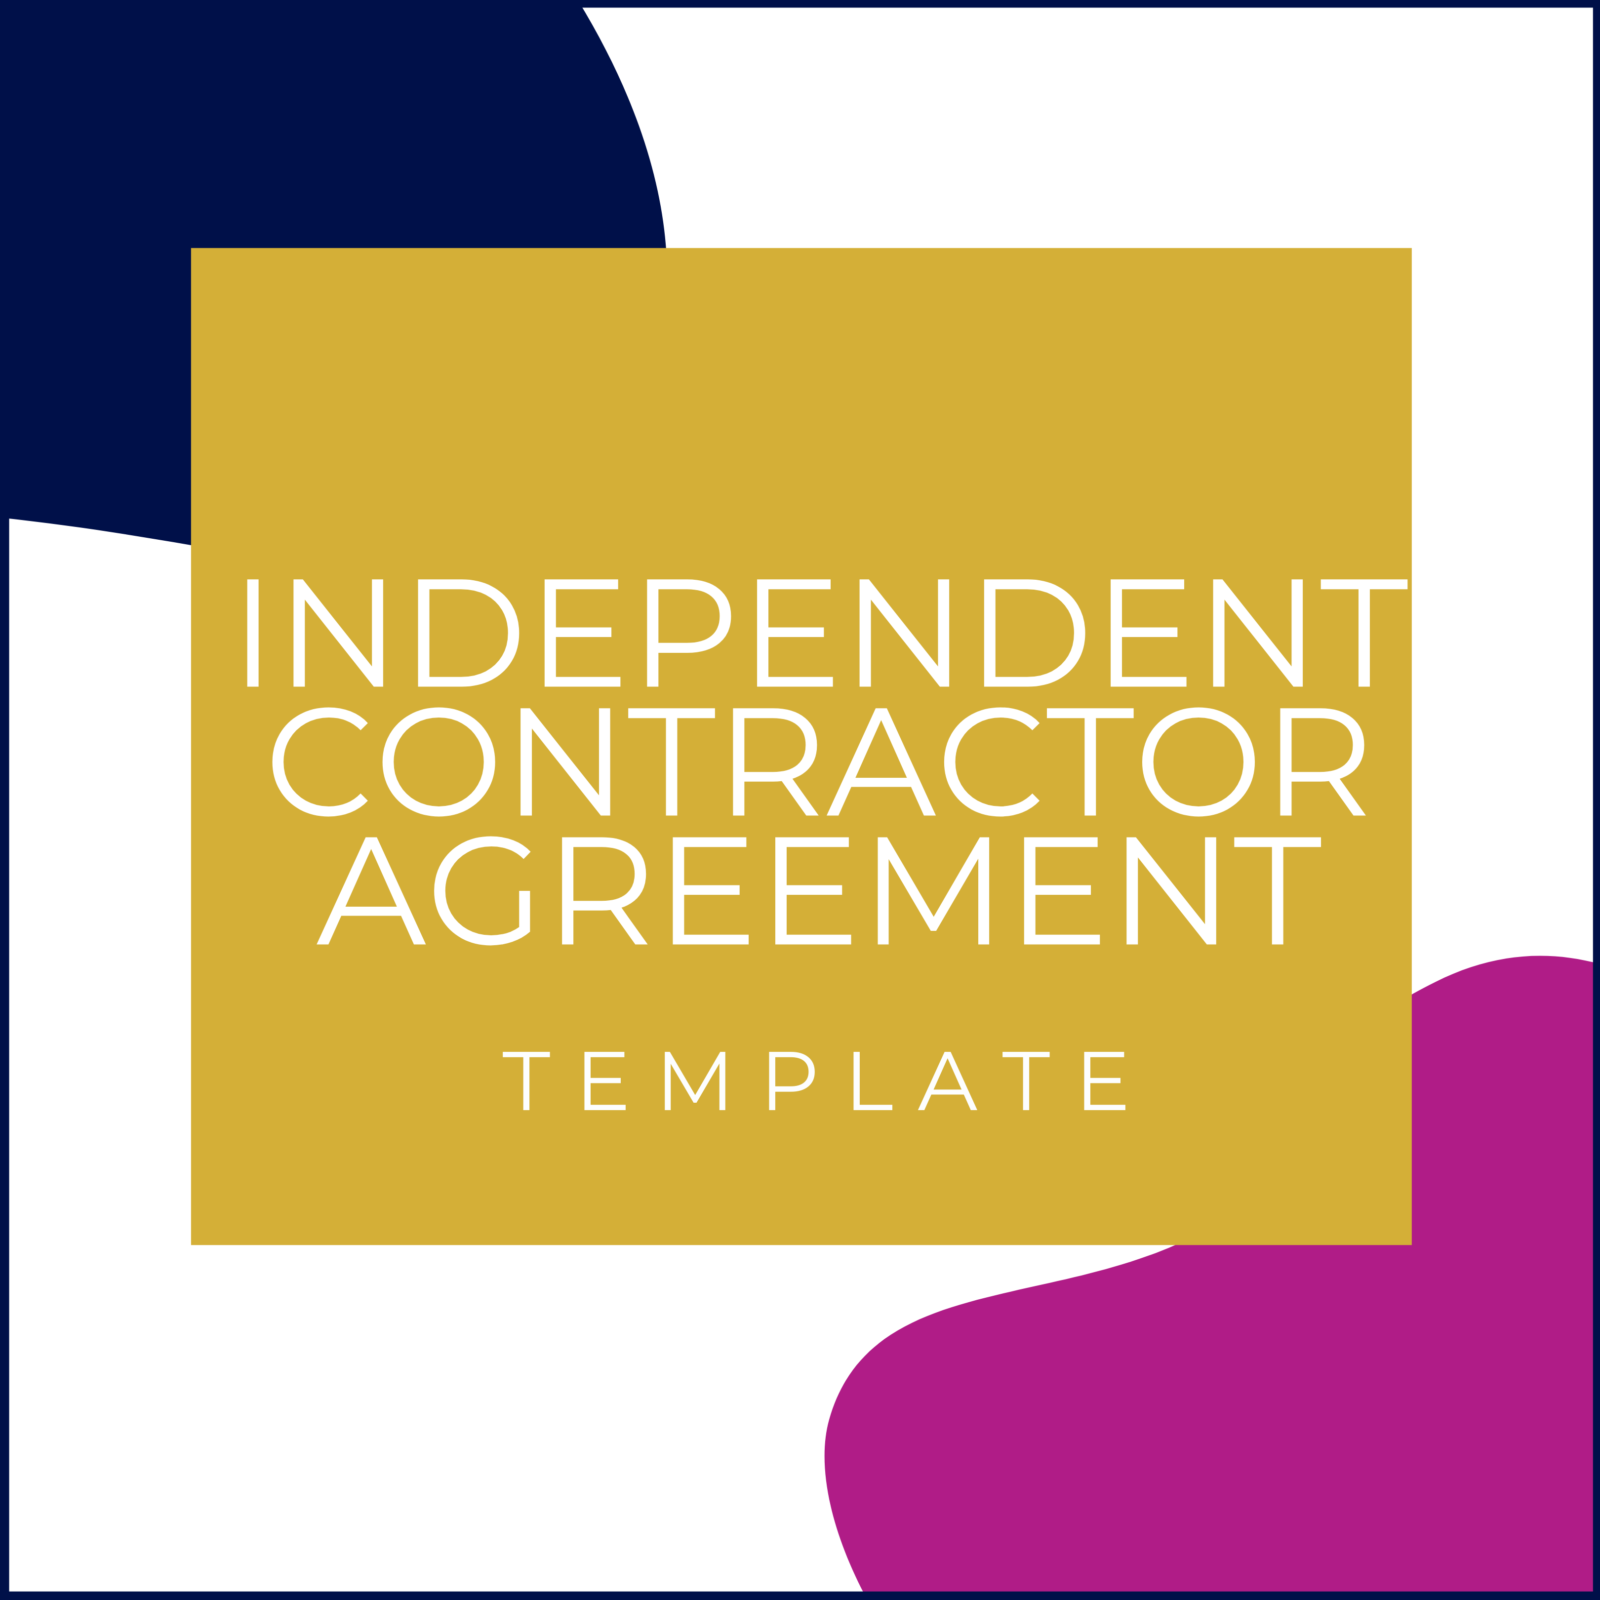 independent-contractor-agreement-template-boss-contract-society